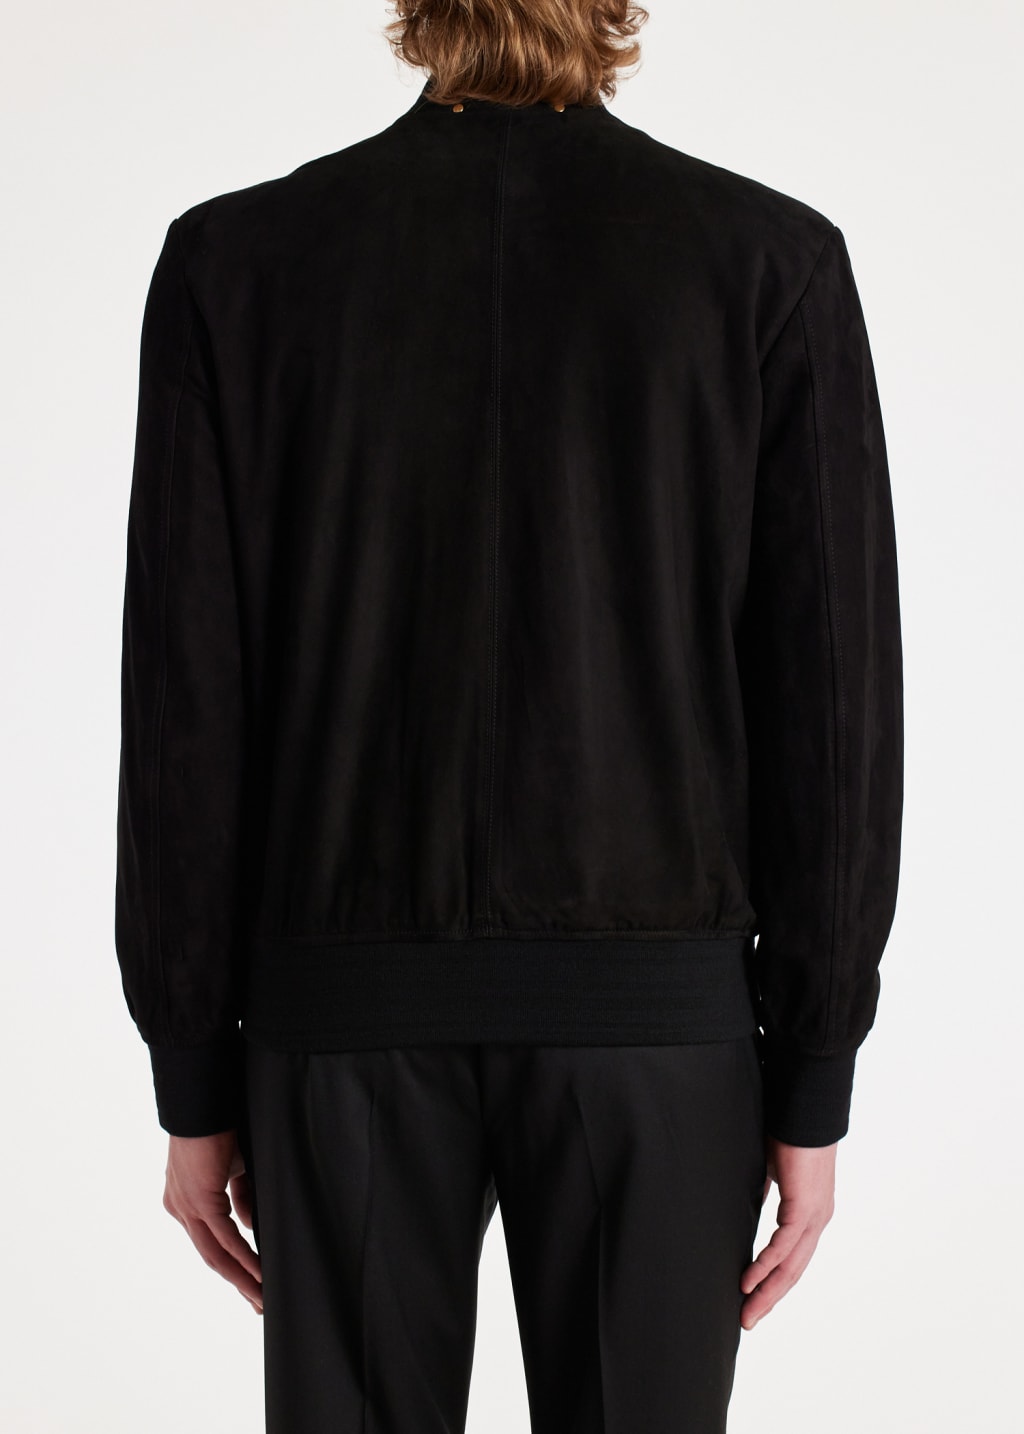 Model View - Black Suede Bomber Jacket Paul Smith